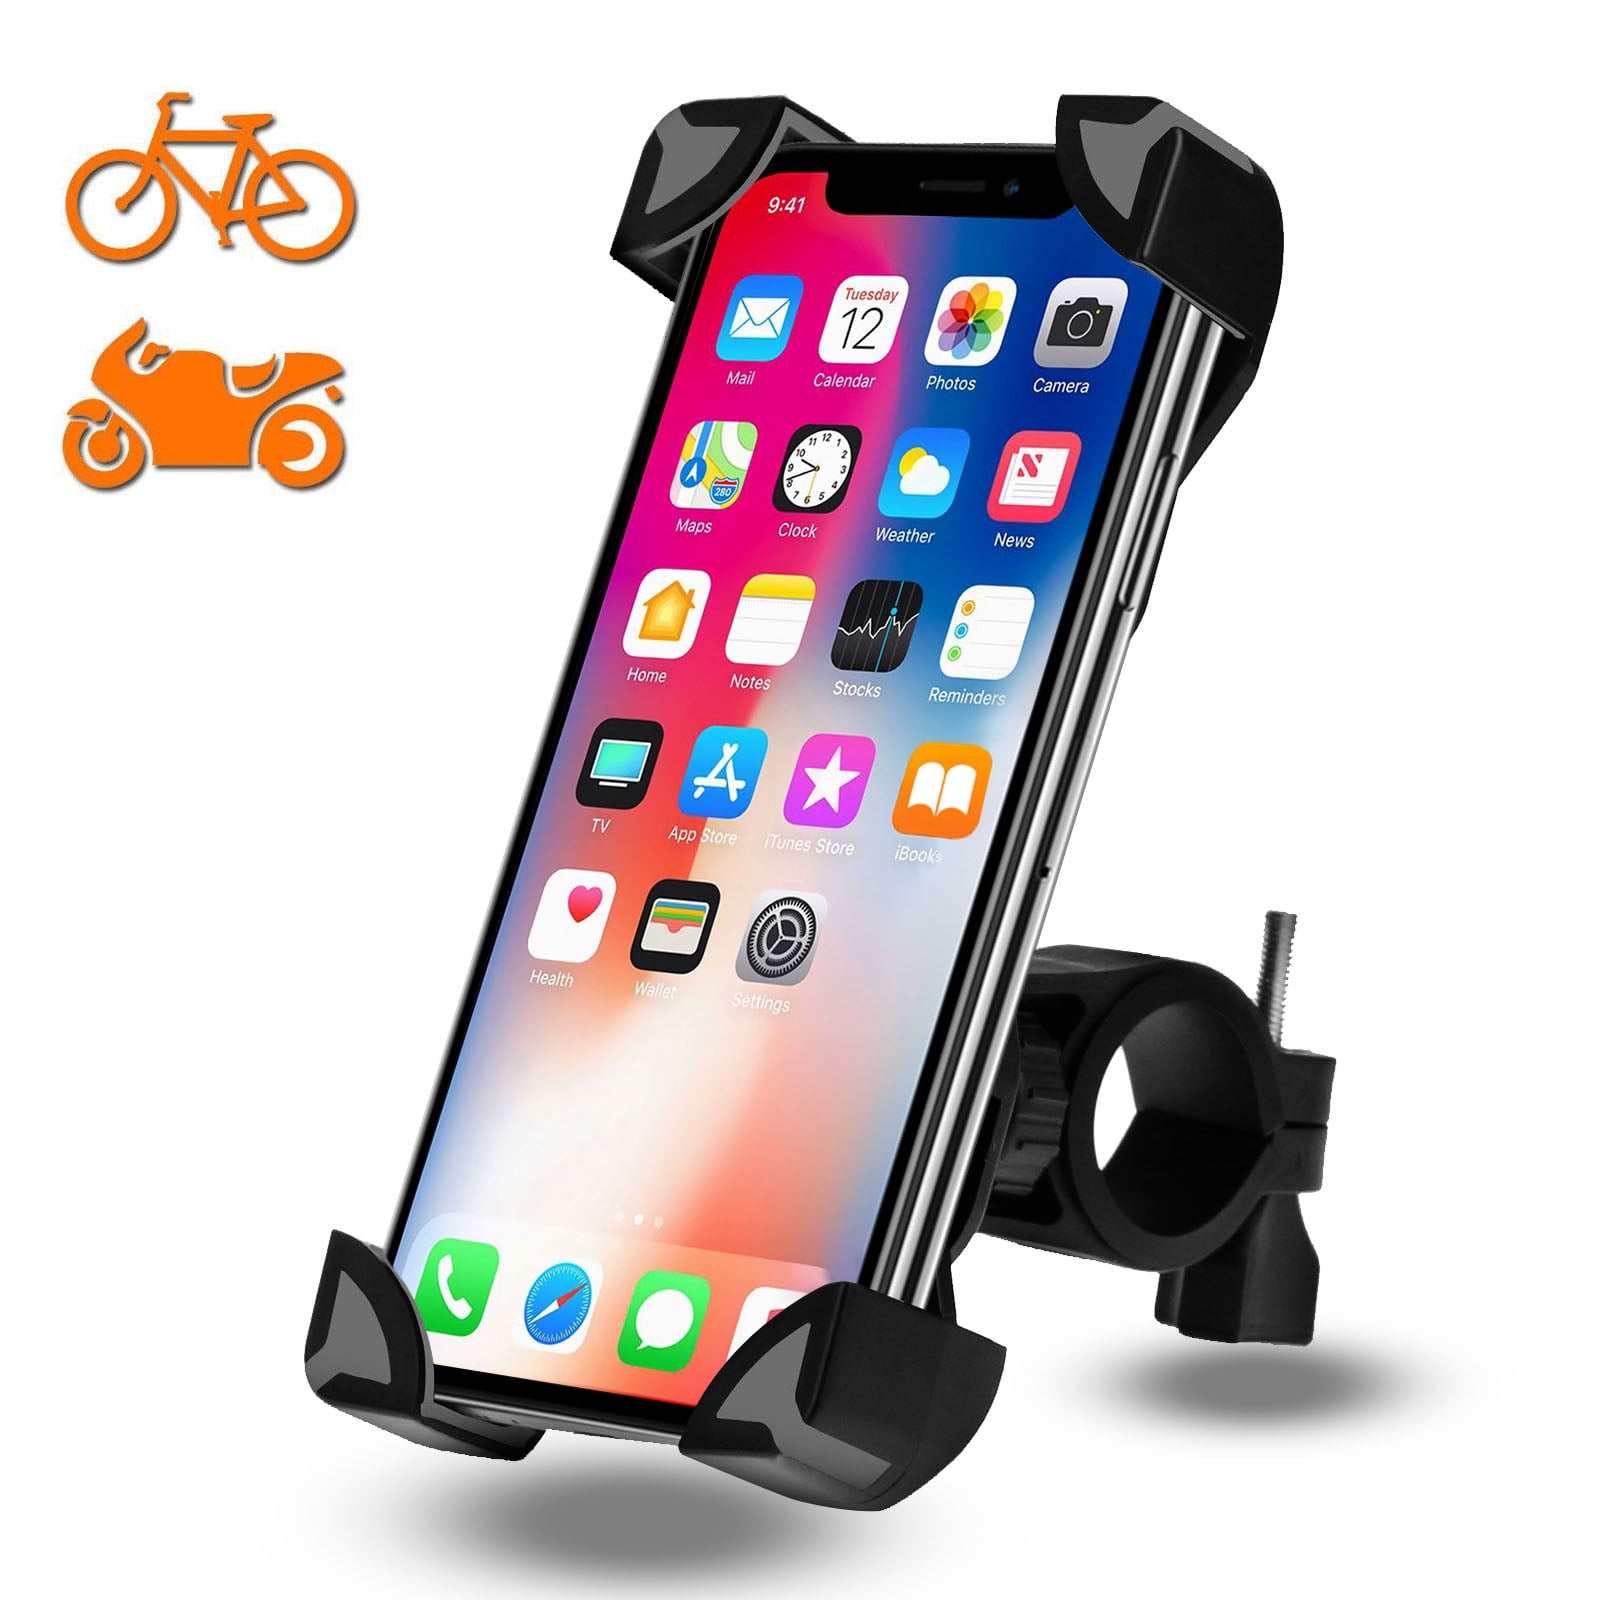 Bicycle Motorcycle Bike Handlebar Mount Cellphone Holder USB Charger For Phone